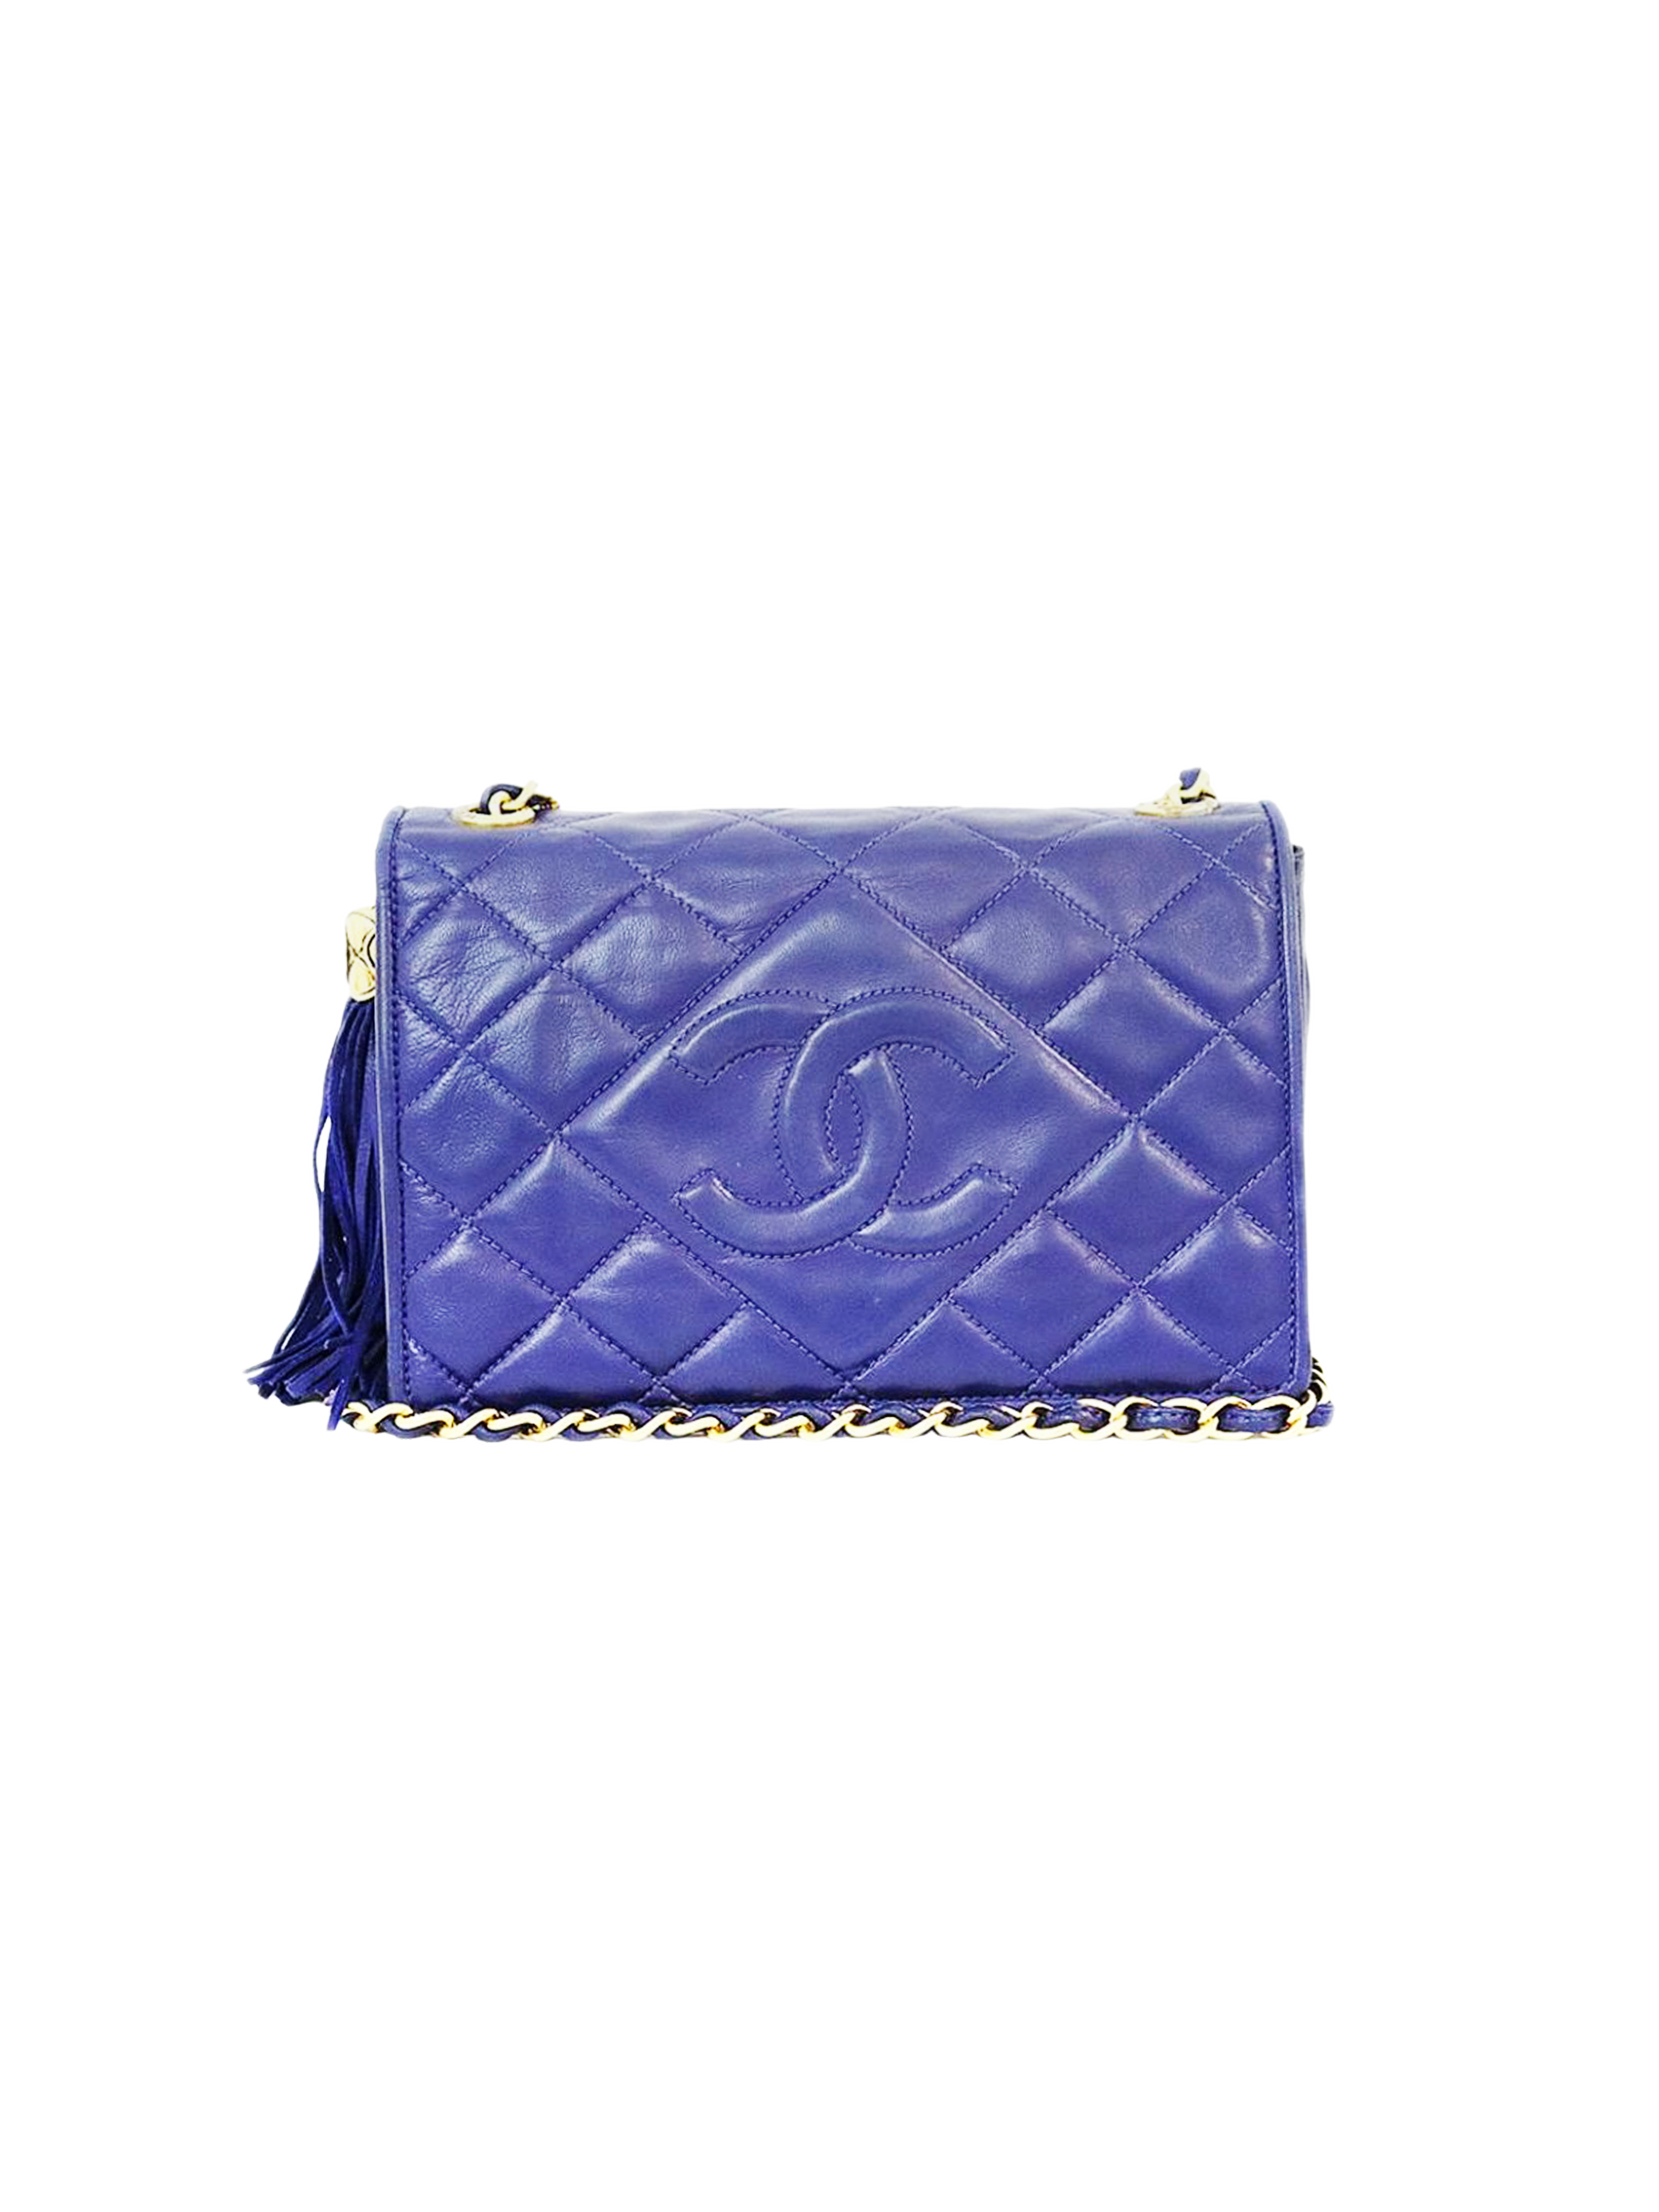 Chanel Vintage 1980s Matelasse Quilted Navy Blue Lambskin Leather